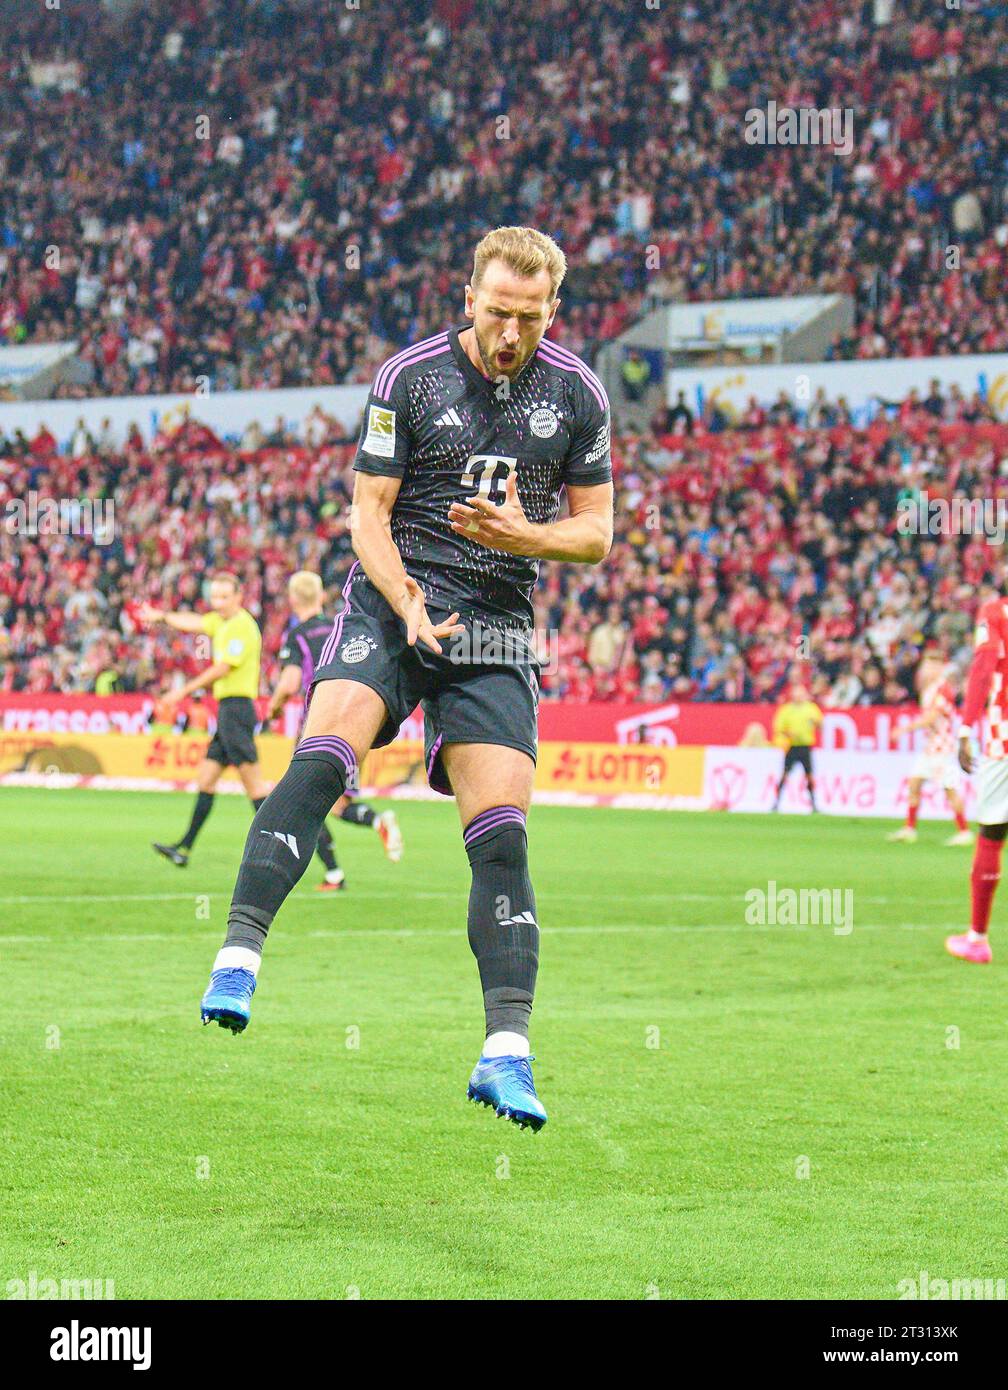 Harry Kane, FCB 9 celebrates his goal, happy, laugh, celebration, 0-2  in the match 1. FSV MAINZ 05 -  FC BAYERN MUENCHEN    on Oct 21, 2023 in Mainz, Germany. Season 2023/2024, 1.Bundesliga, FCB, München, matchday 8, 8.Spieltag © Peter Schatz / Alamy Live News    - DFL REGULATIONS PROHIBIT ANY USE OF PHOTOGRAPHS as IMAGE SEQUENCES and/or QUASI-VIDEO - Stock Photo